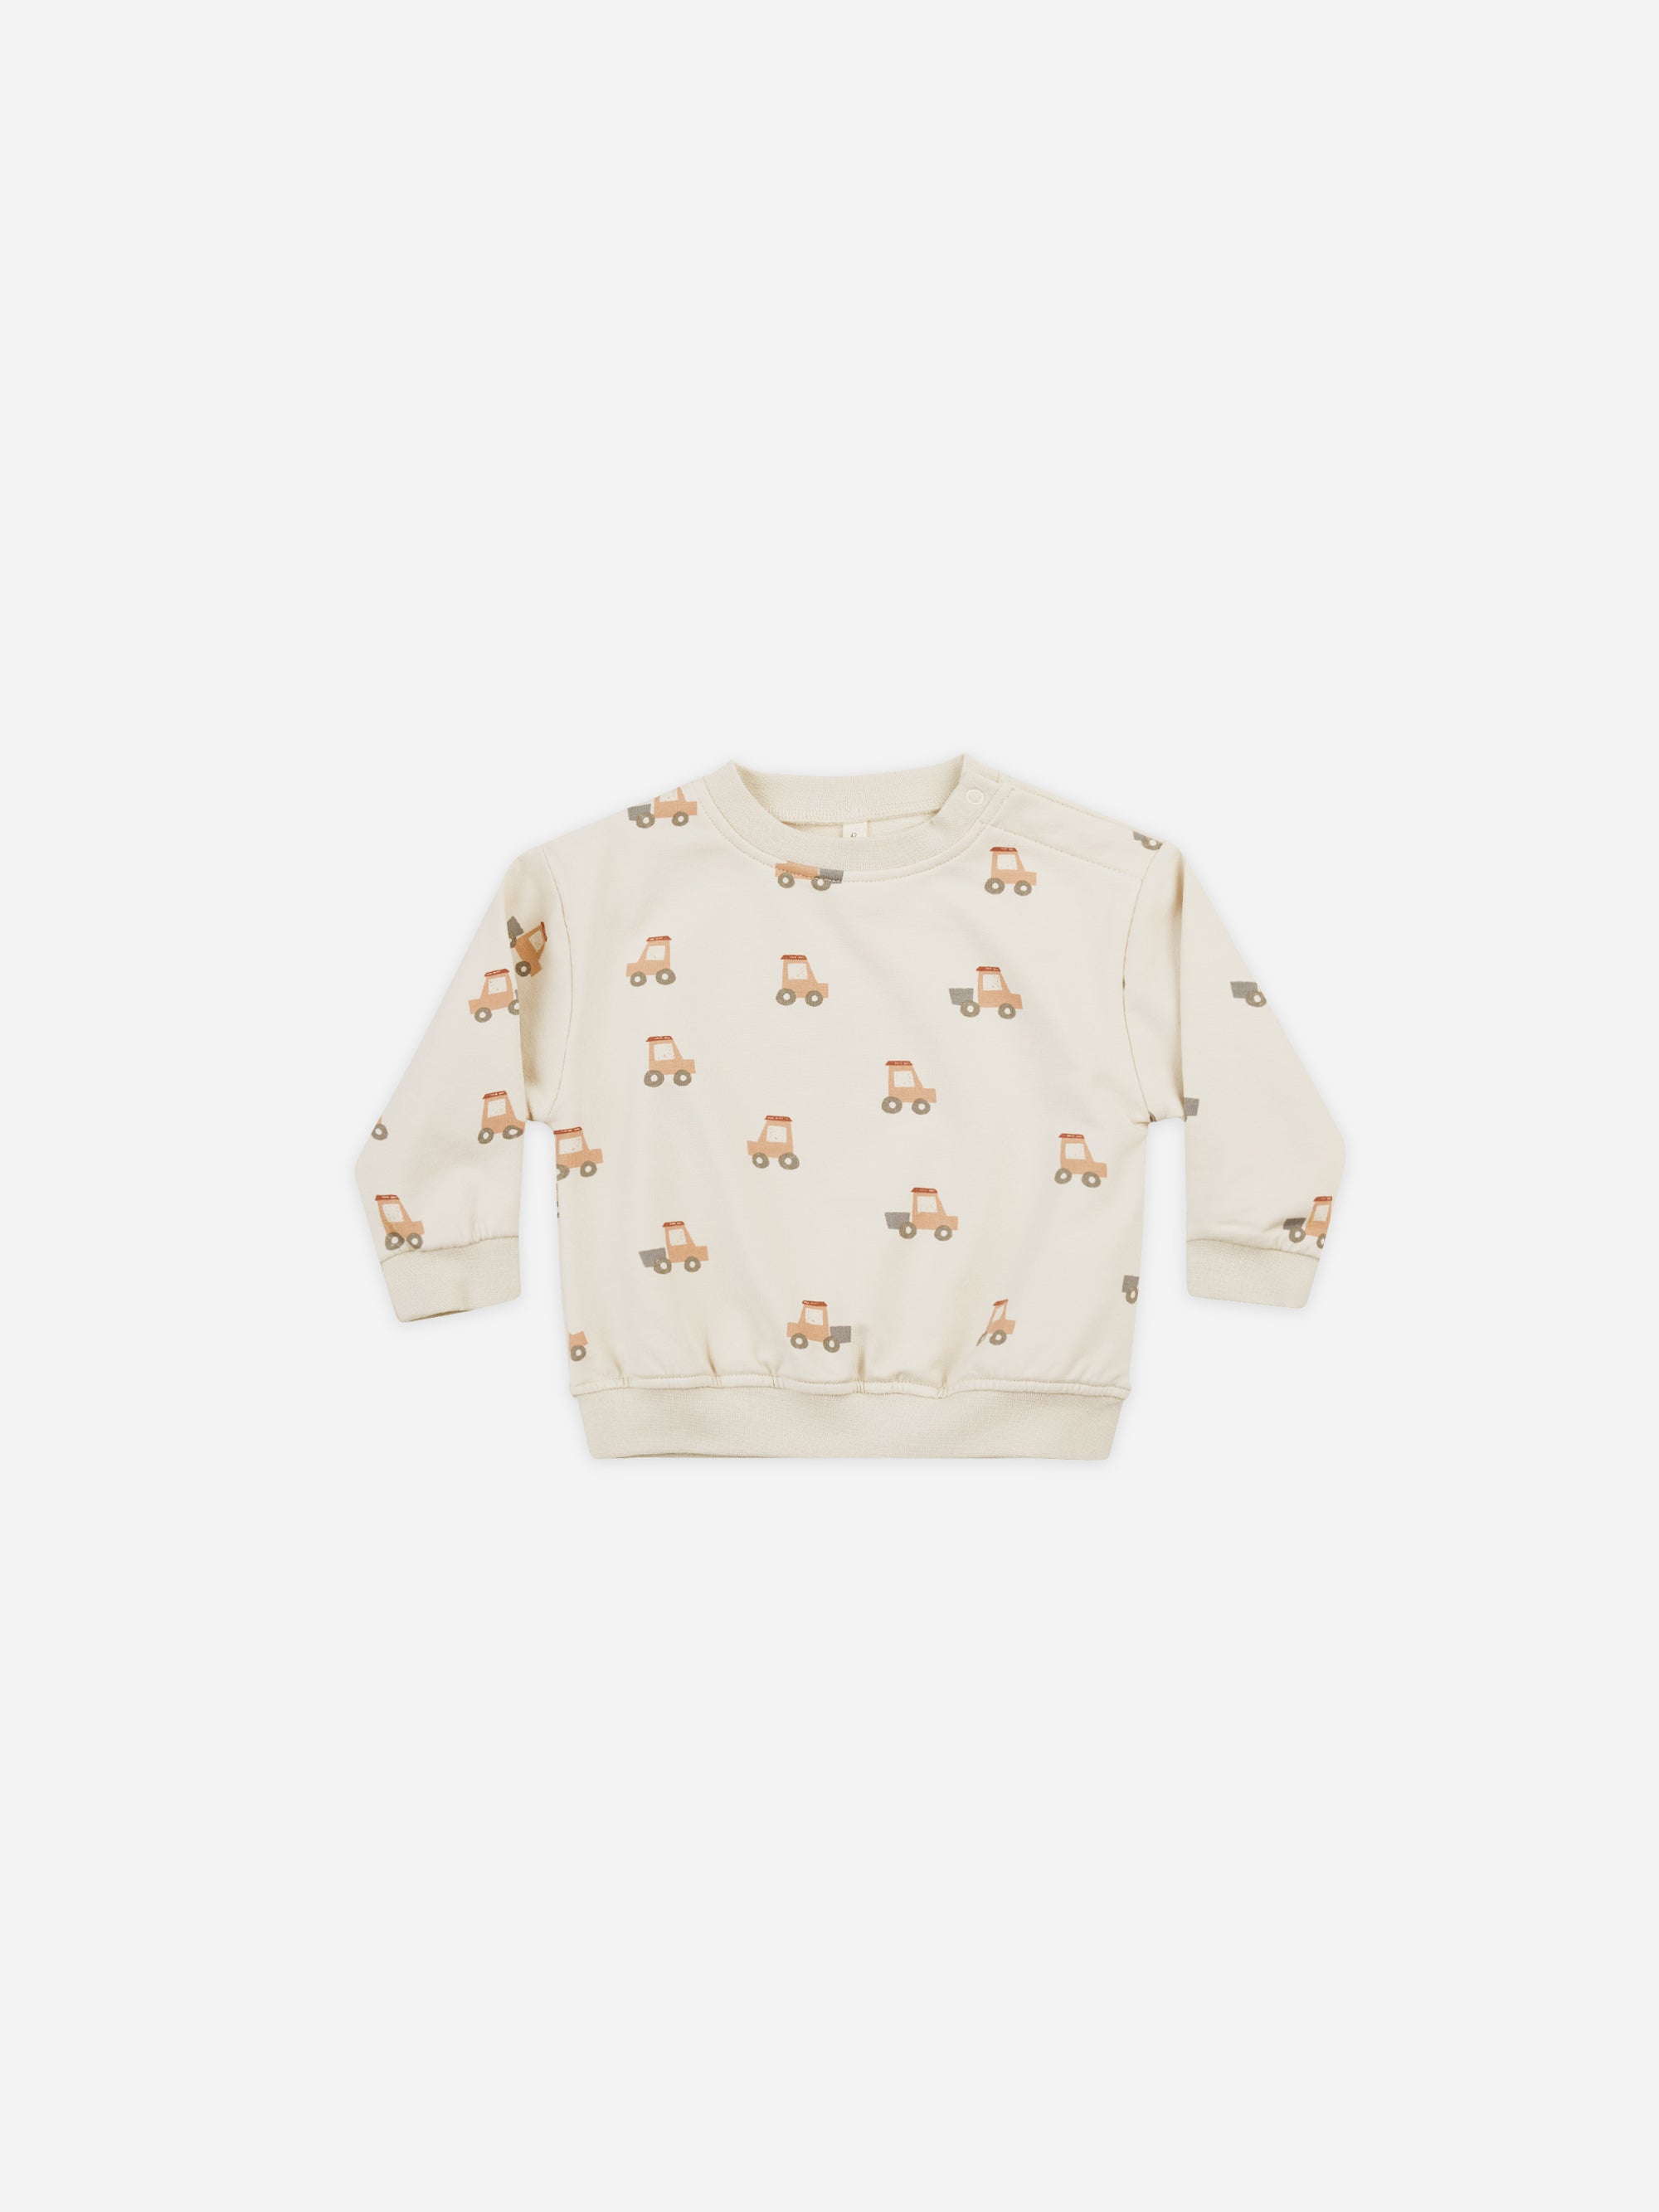 Sweatshirt || Tractors - Rylee + Cru | Kids Clothes | Trendy Baby Clothes | Modern Infant Outfits |